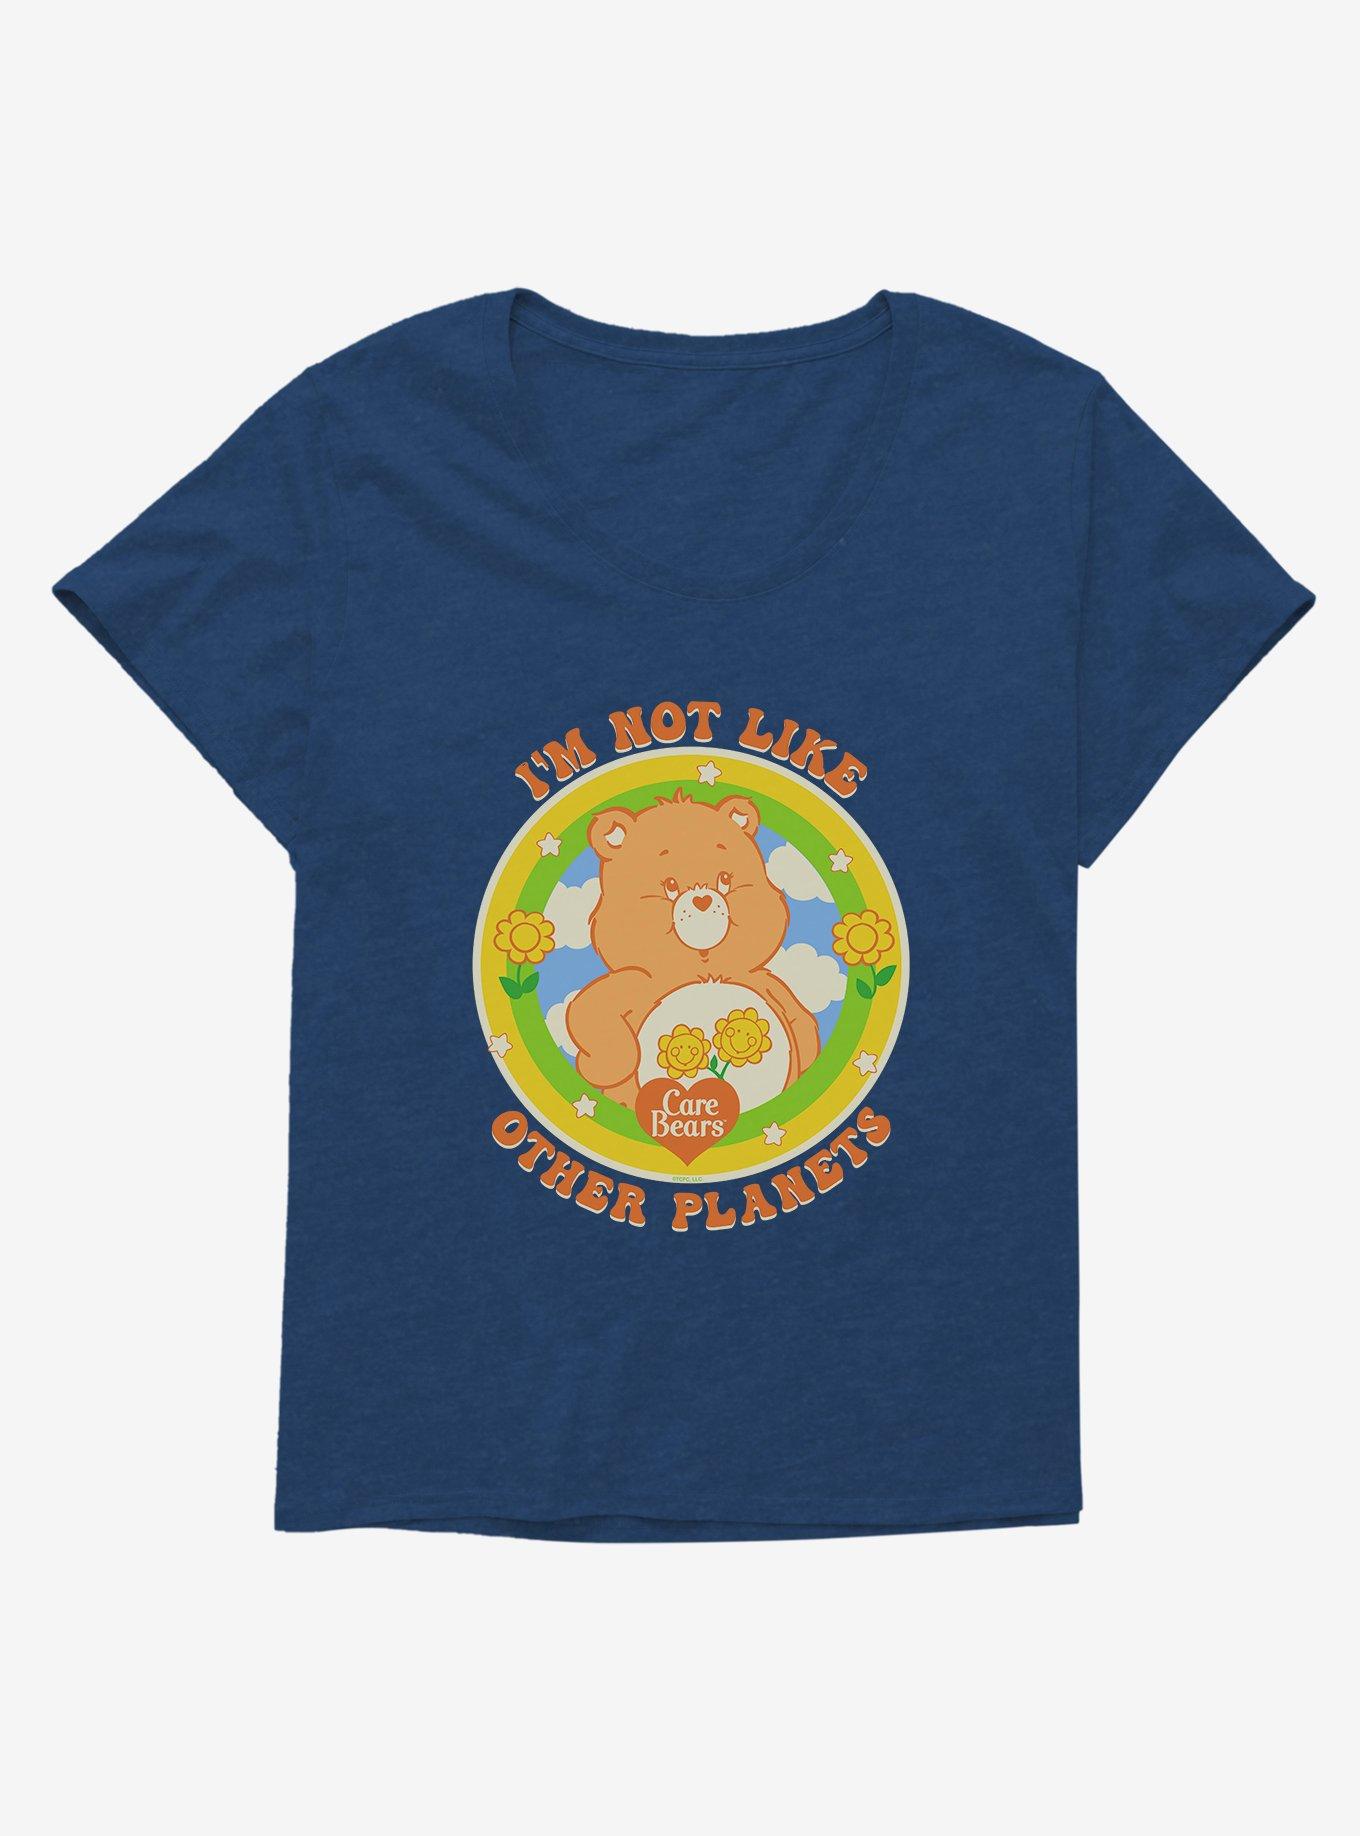 Care Bears Not Like Other Planets Girls T-Shirt Plus